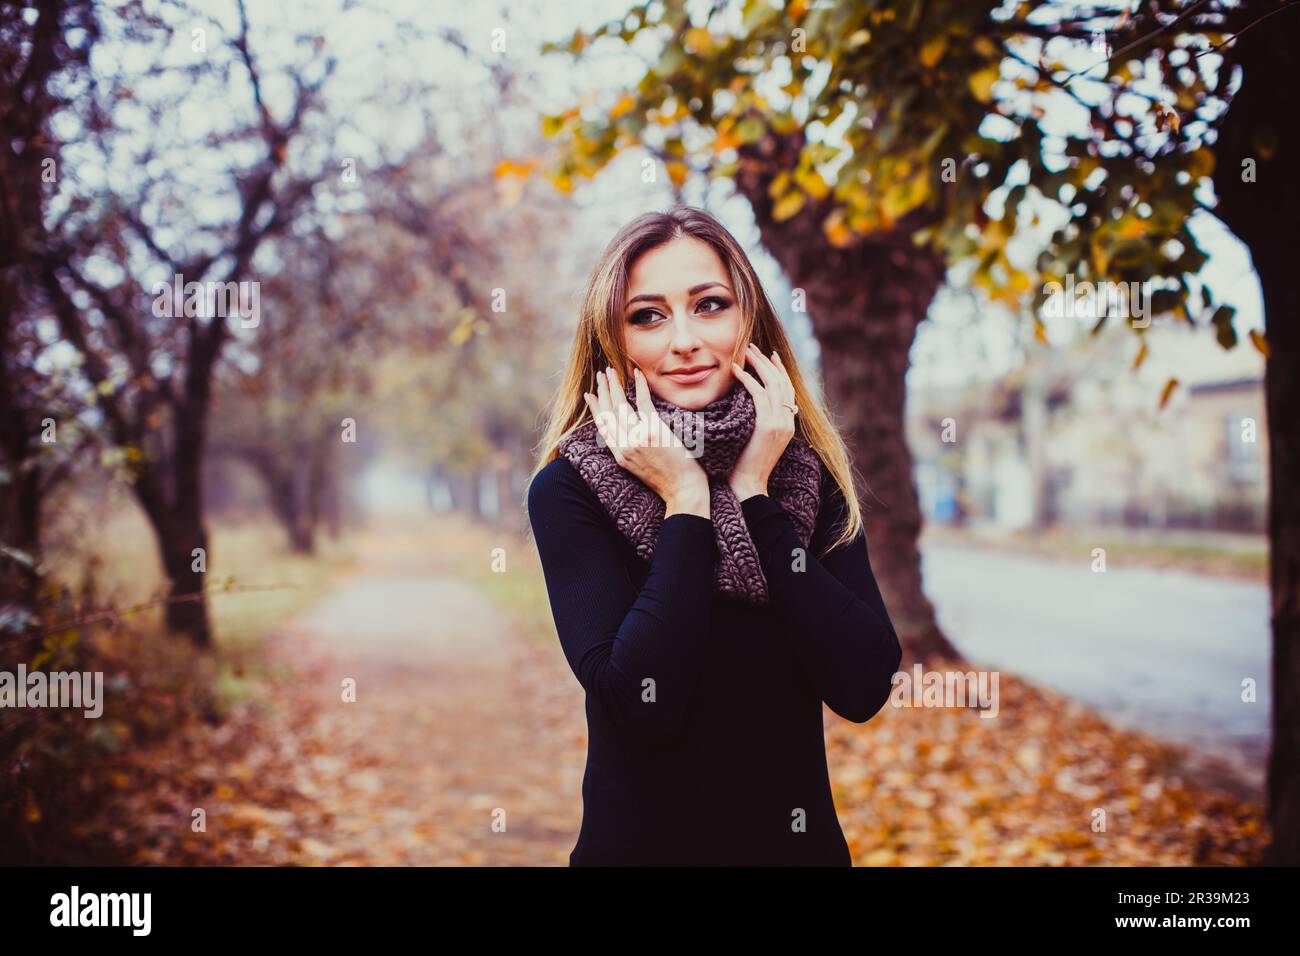 Pretty teenage girl with long hair. Beautiful young woman walking outdoors in autumn. Stock Photo